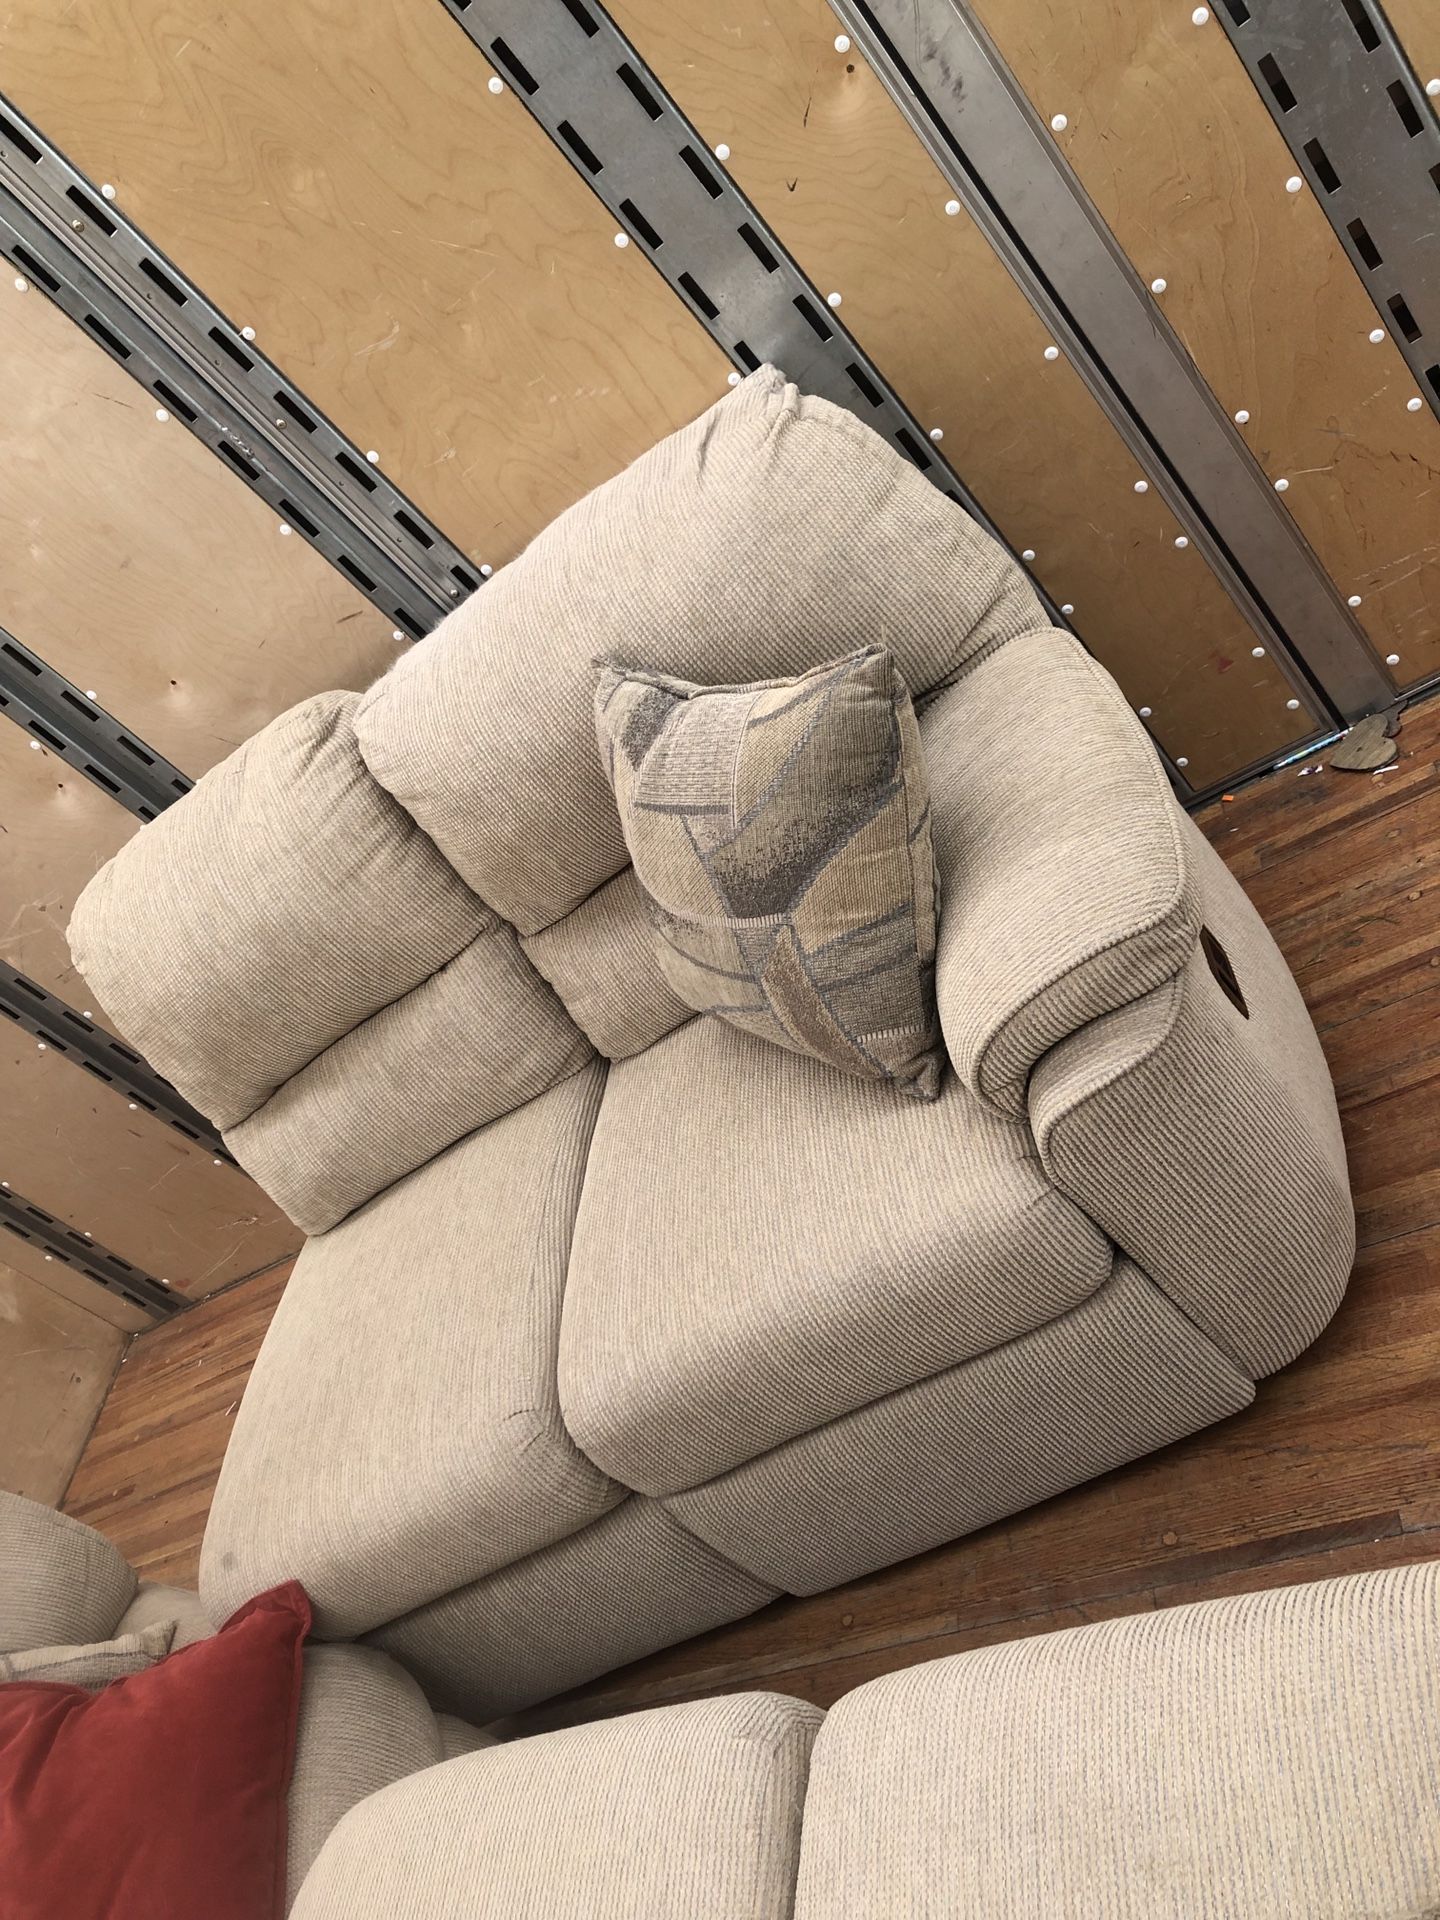 3 piece sectional cloth couch